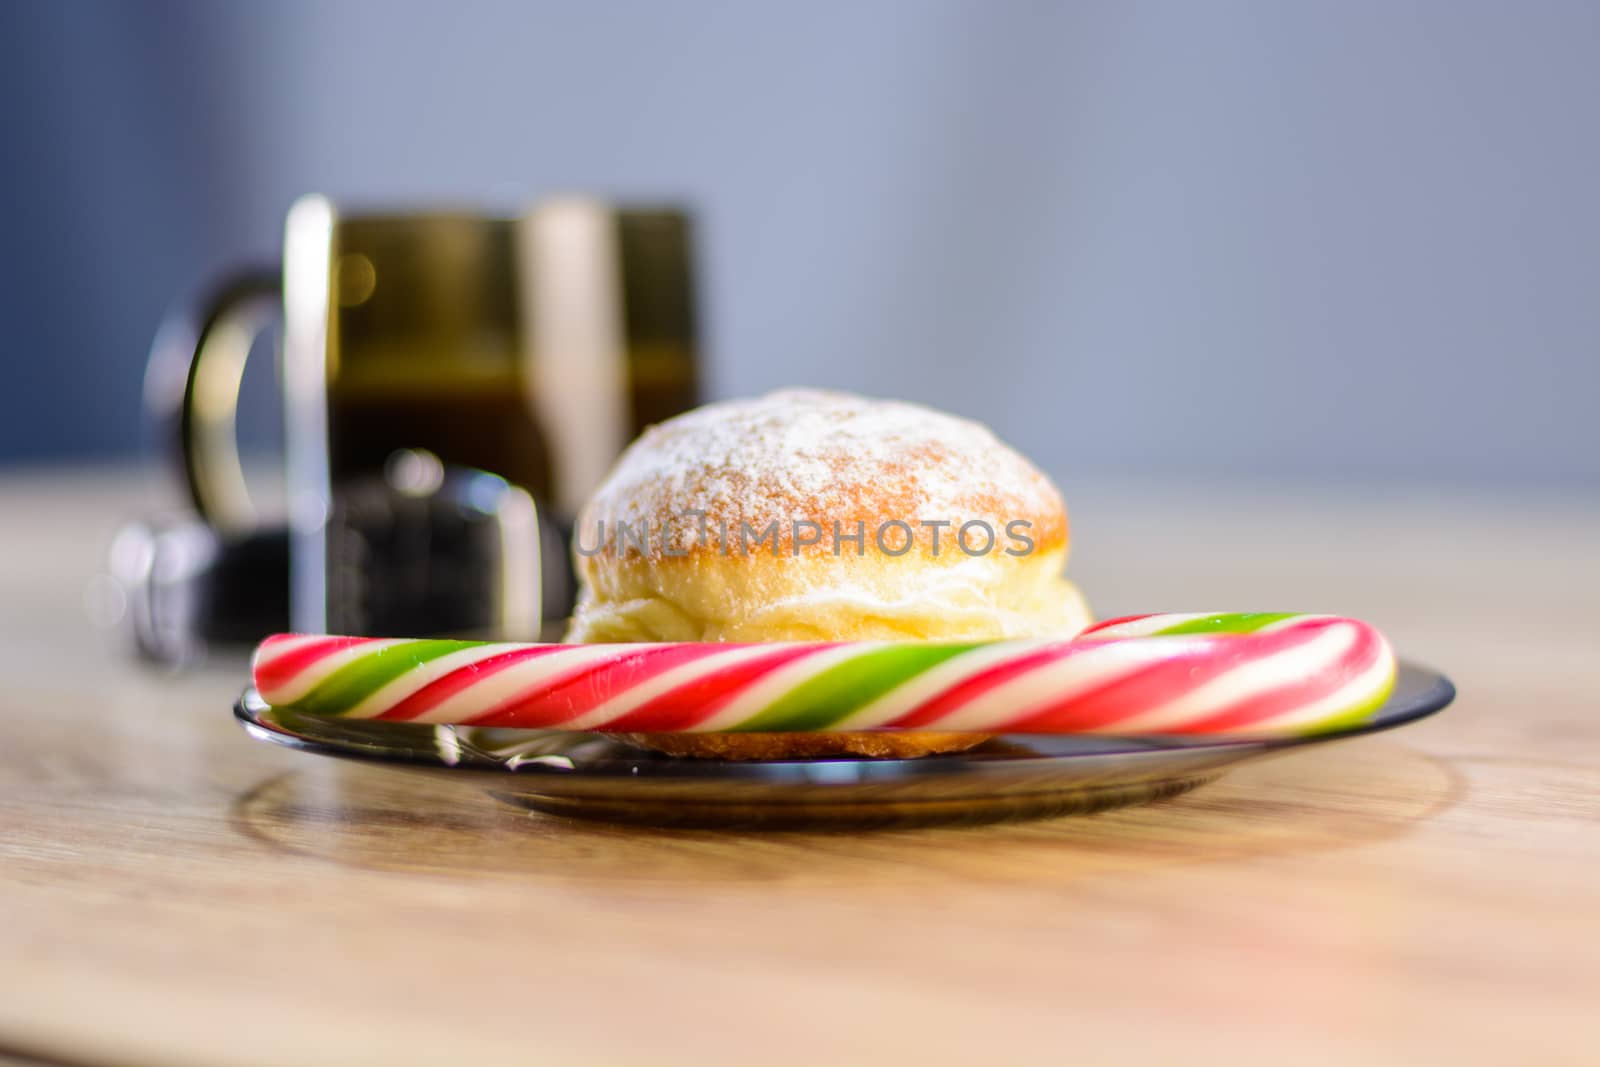 on the plate of a bun and candy along with coffee.